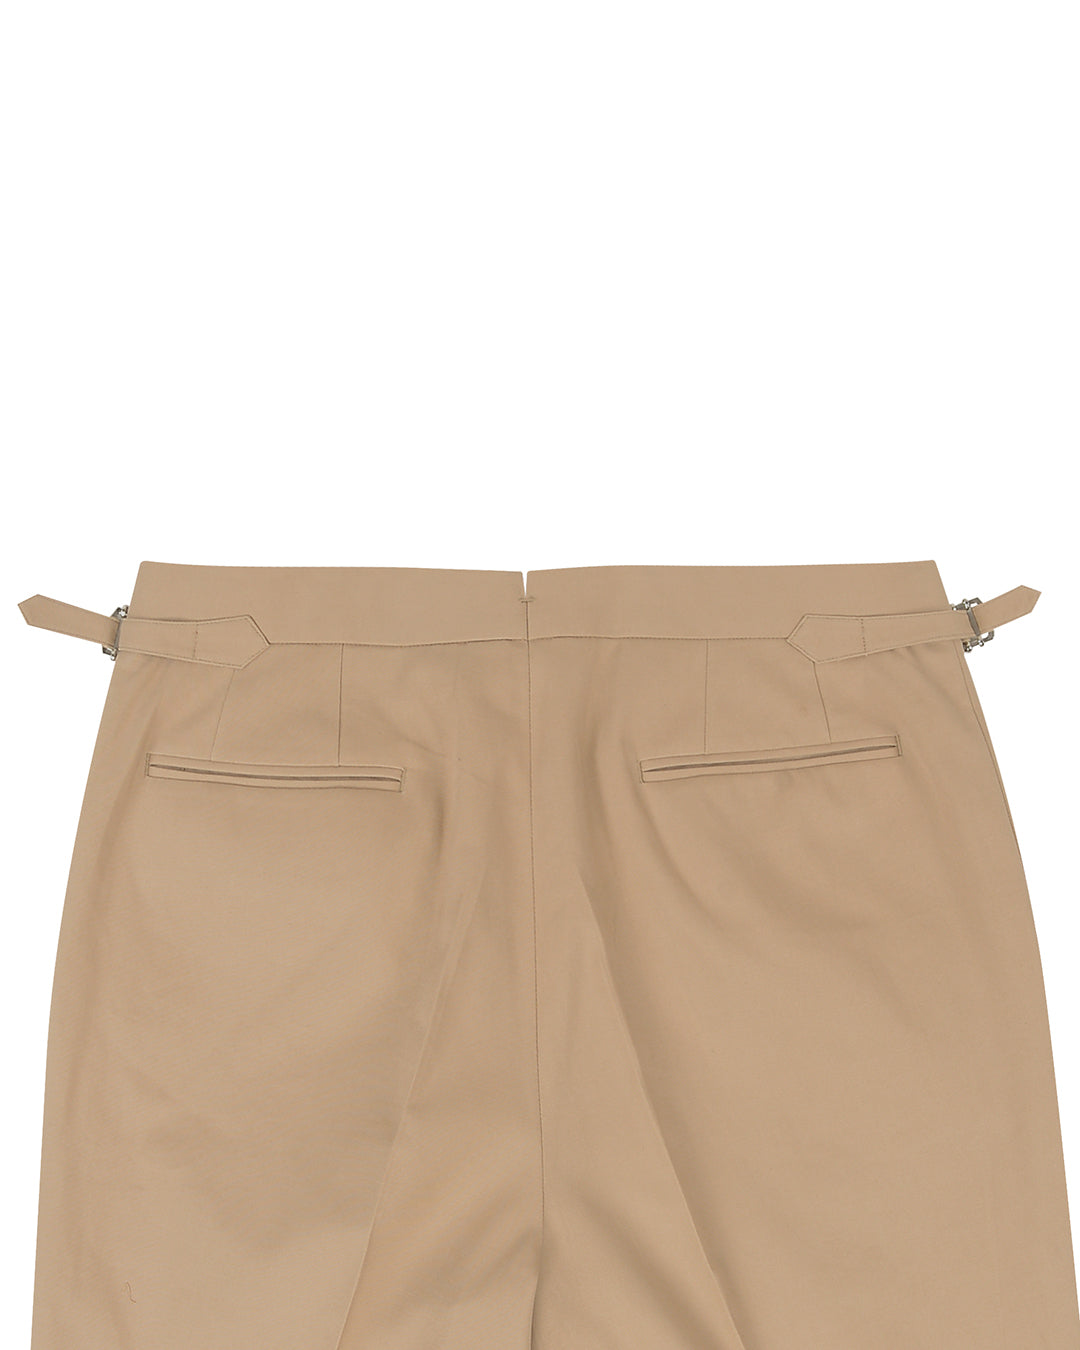 Chino: Pale Taupe Soft Twill